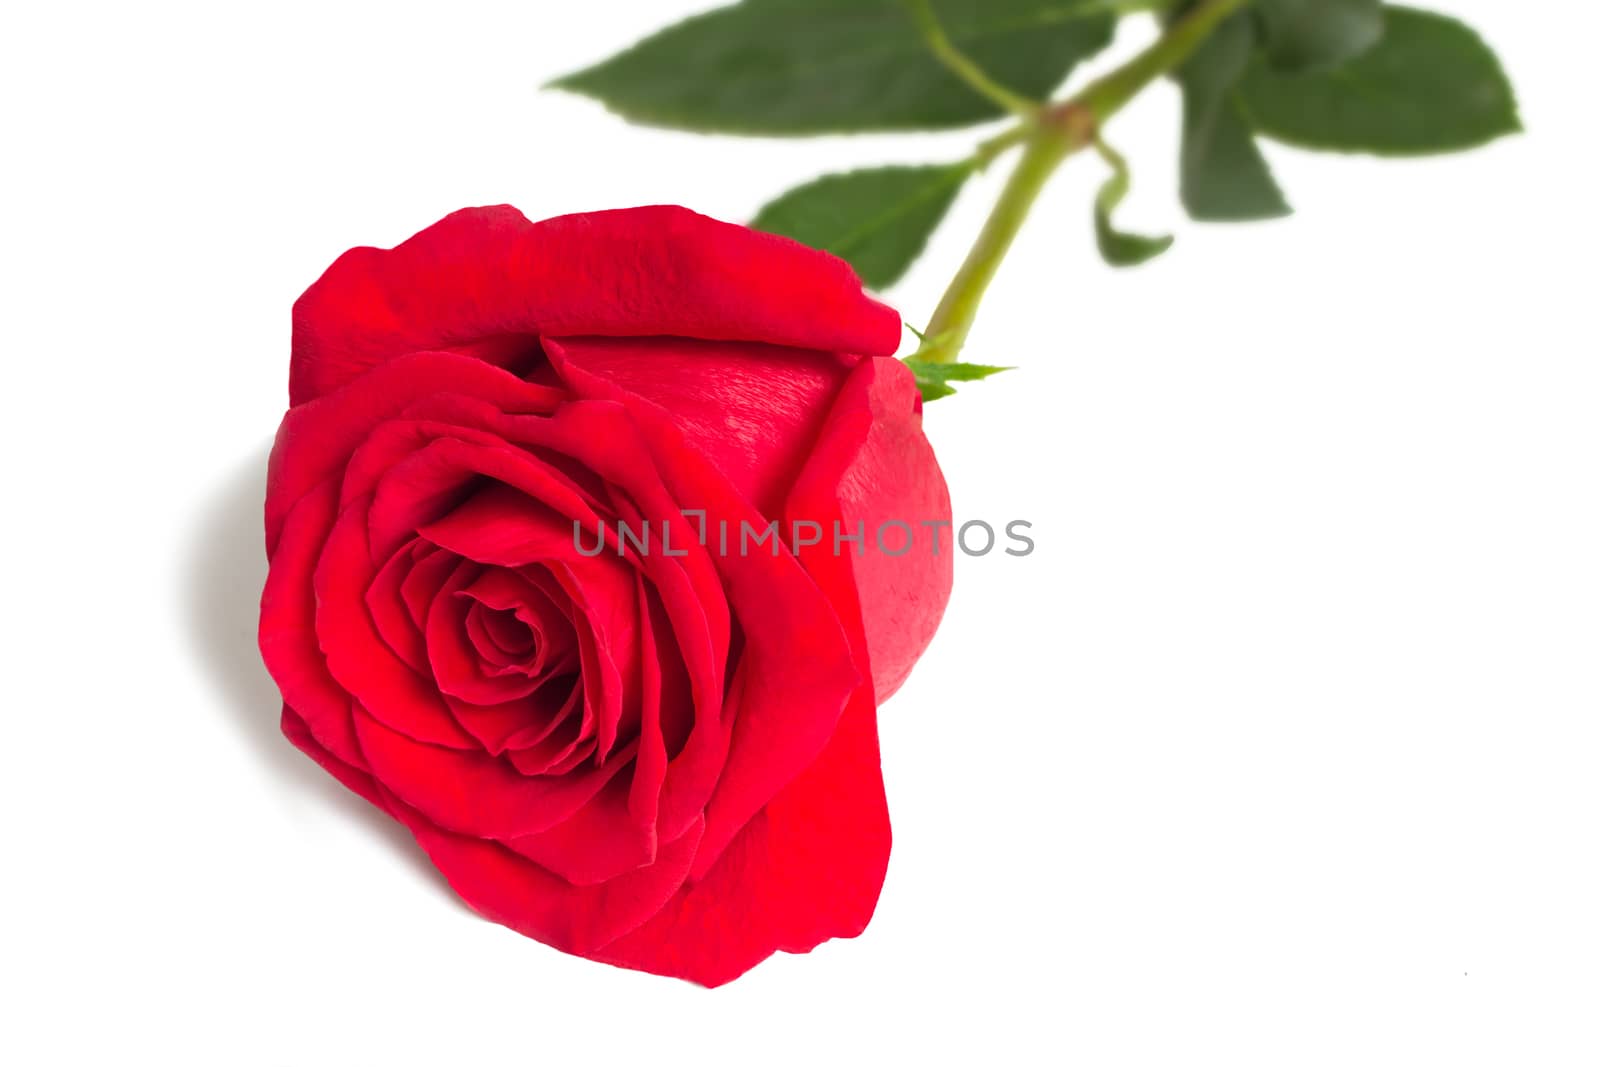 Flower red rose with leaves on a white background. by georgina198